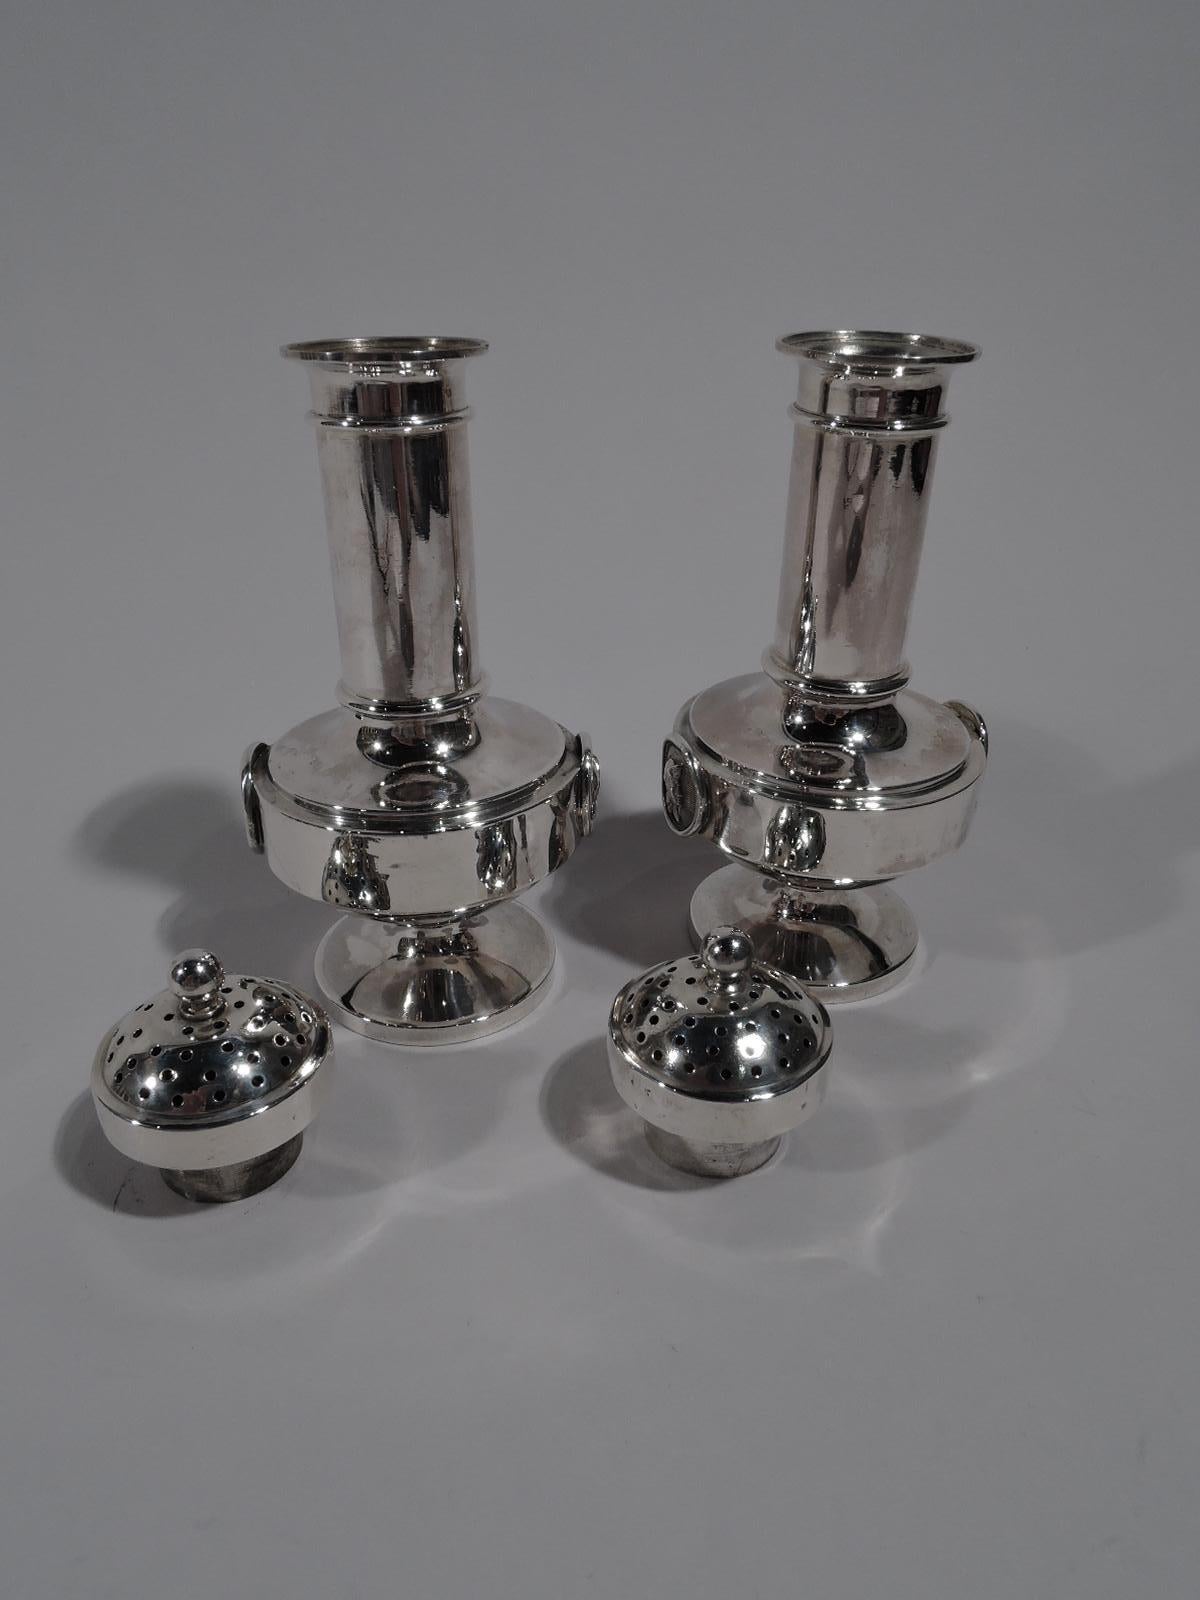 American Classical Pair of New York Sterling Silver Medallion Salt & Pepper Shakers